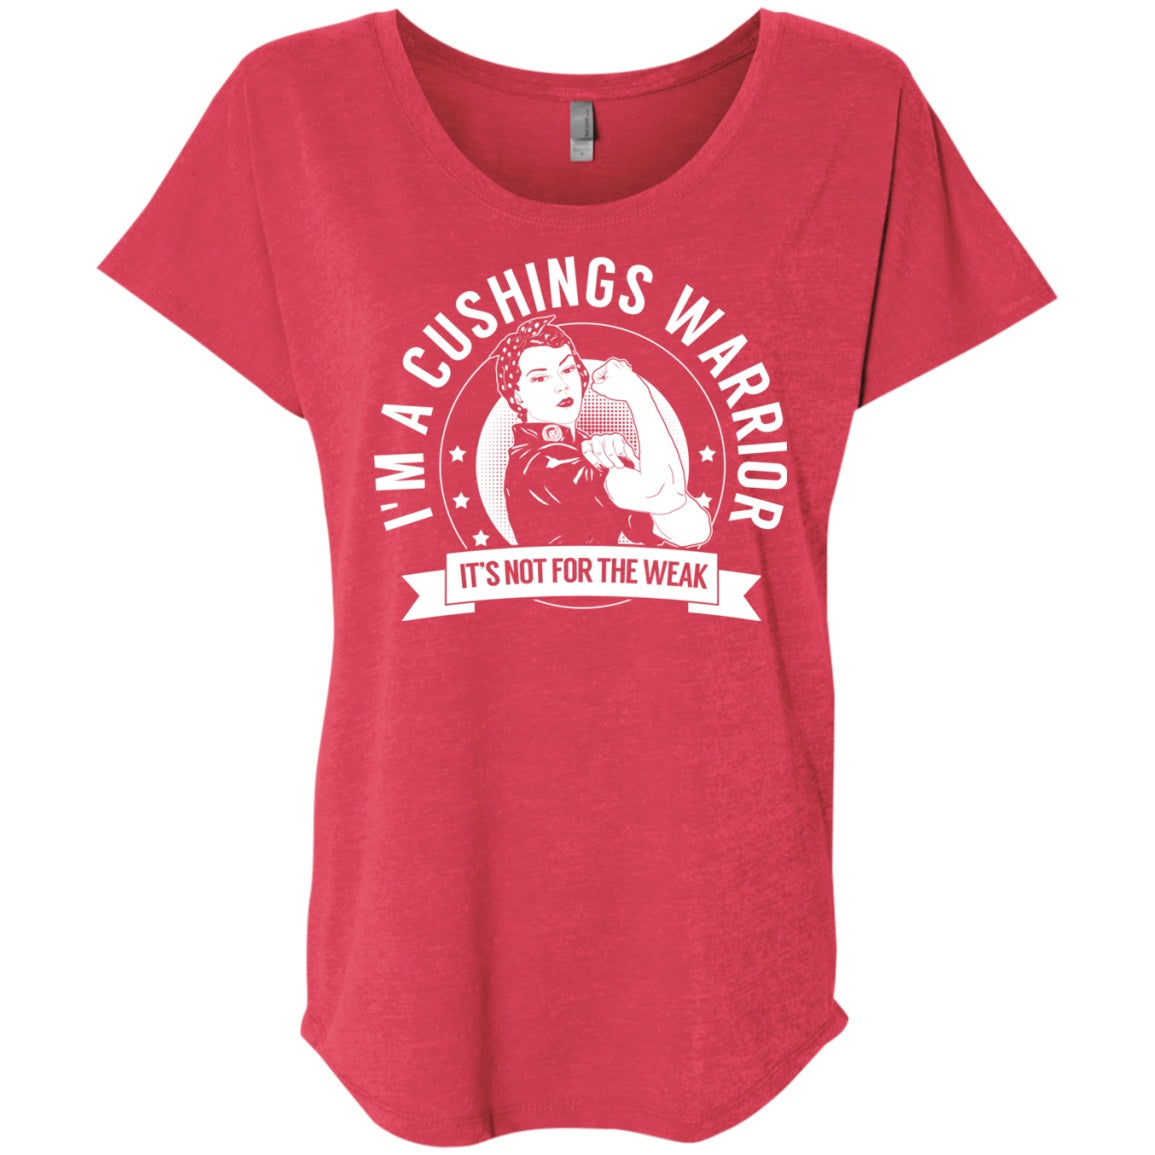 Cushings Warrior Not For The Weak Dolman Sleeve - The Unchargeables